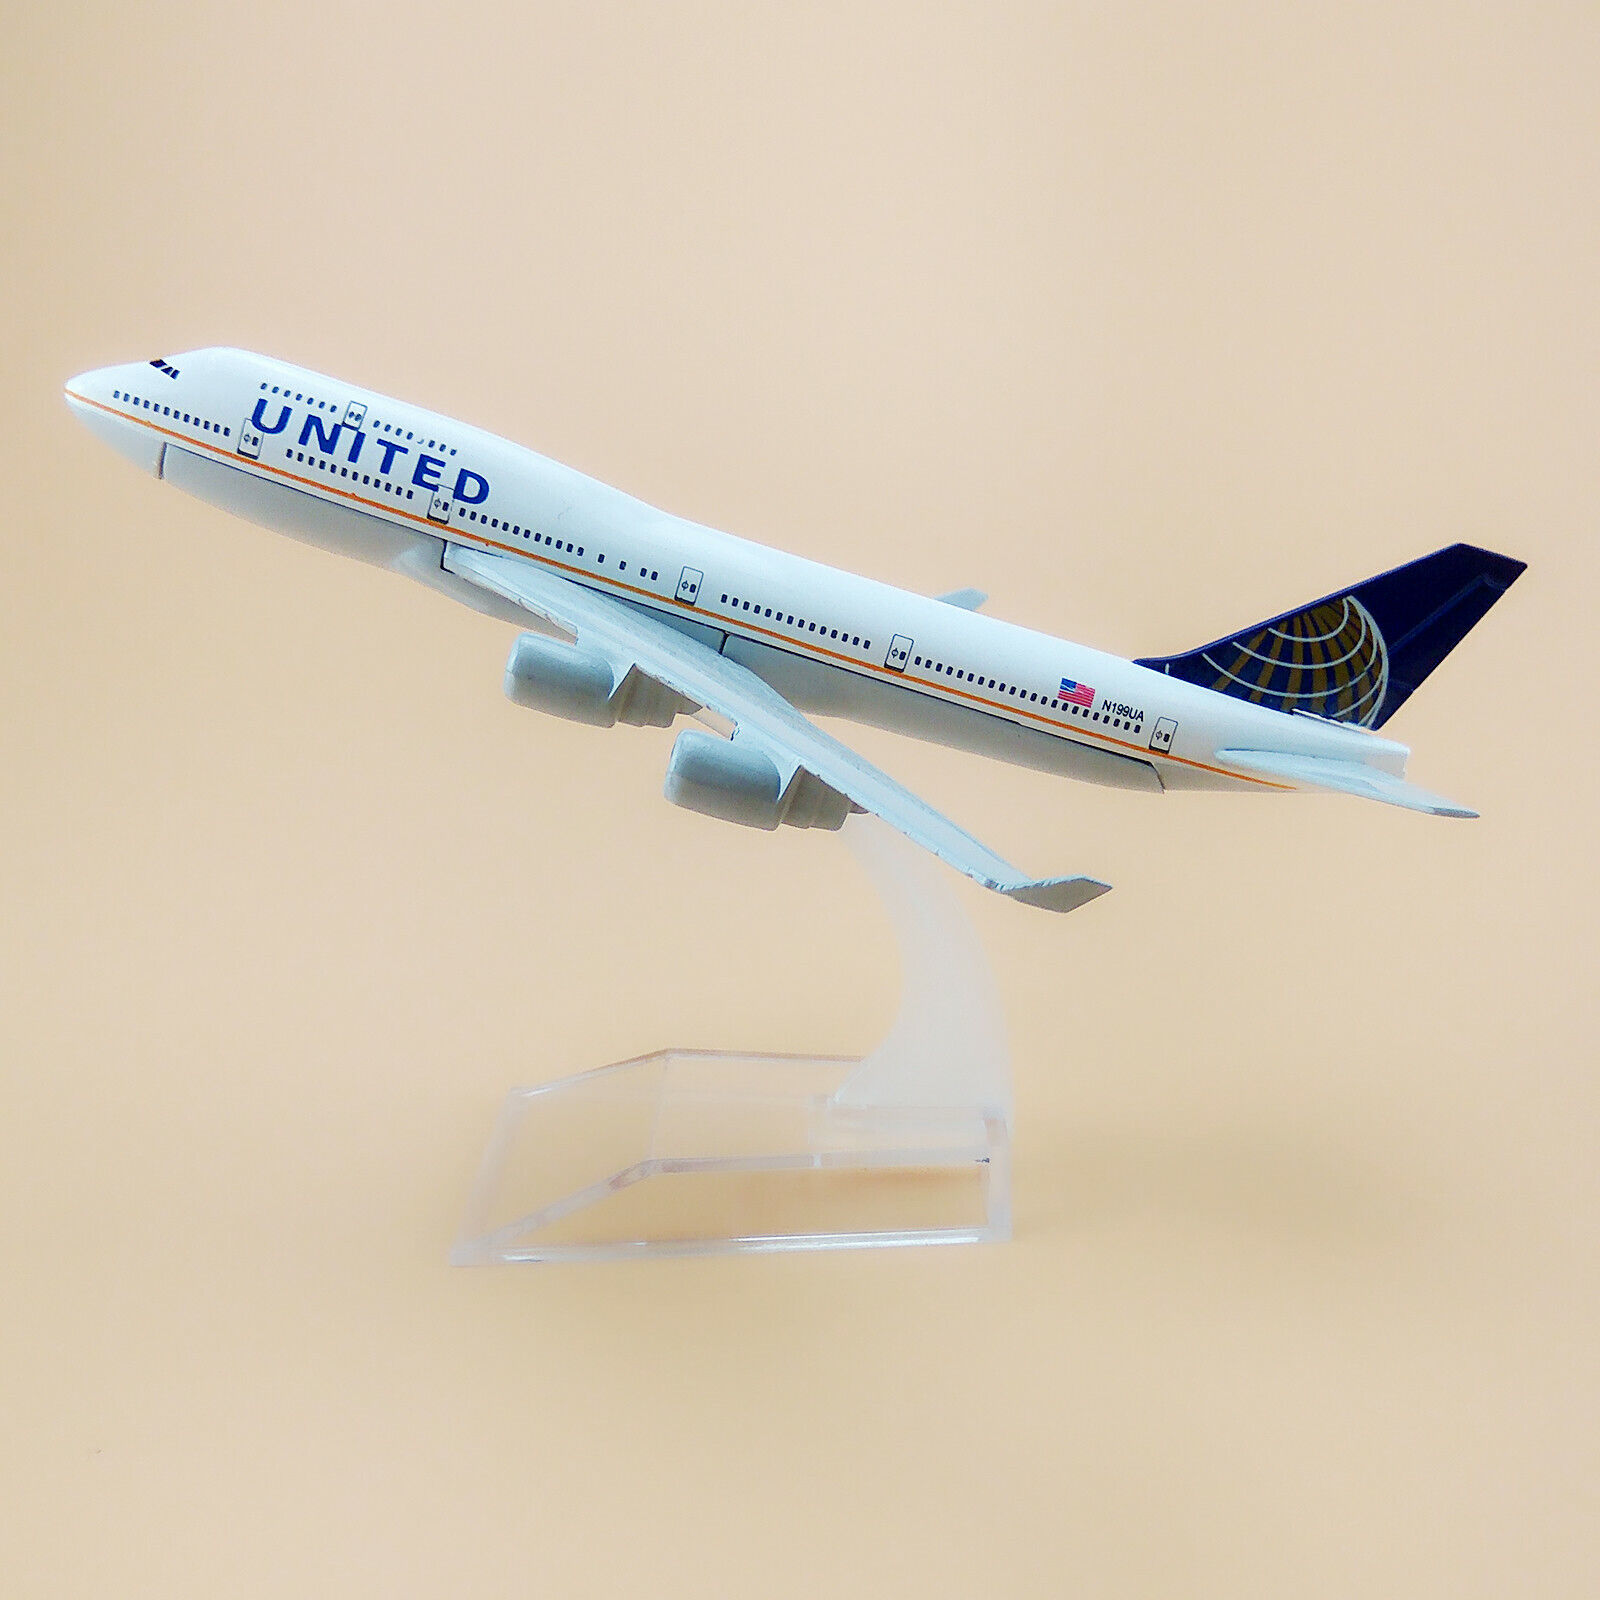 16cm Air UNITED Boeing B747 Airlines Diecast Airplane Model Plane Aircraft Alloy